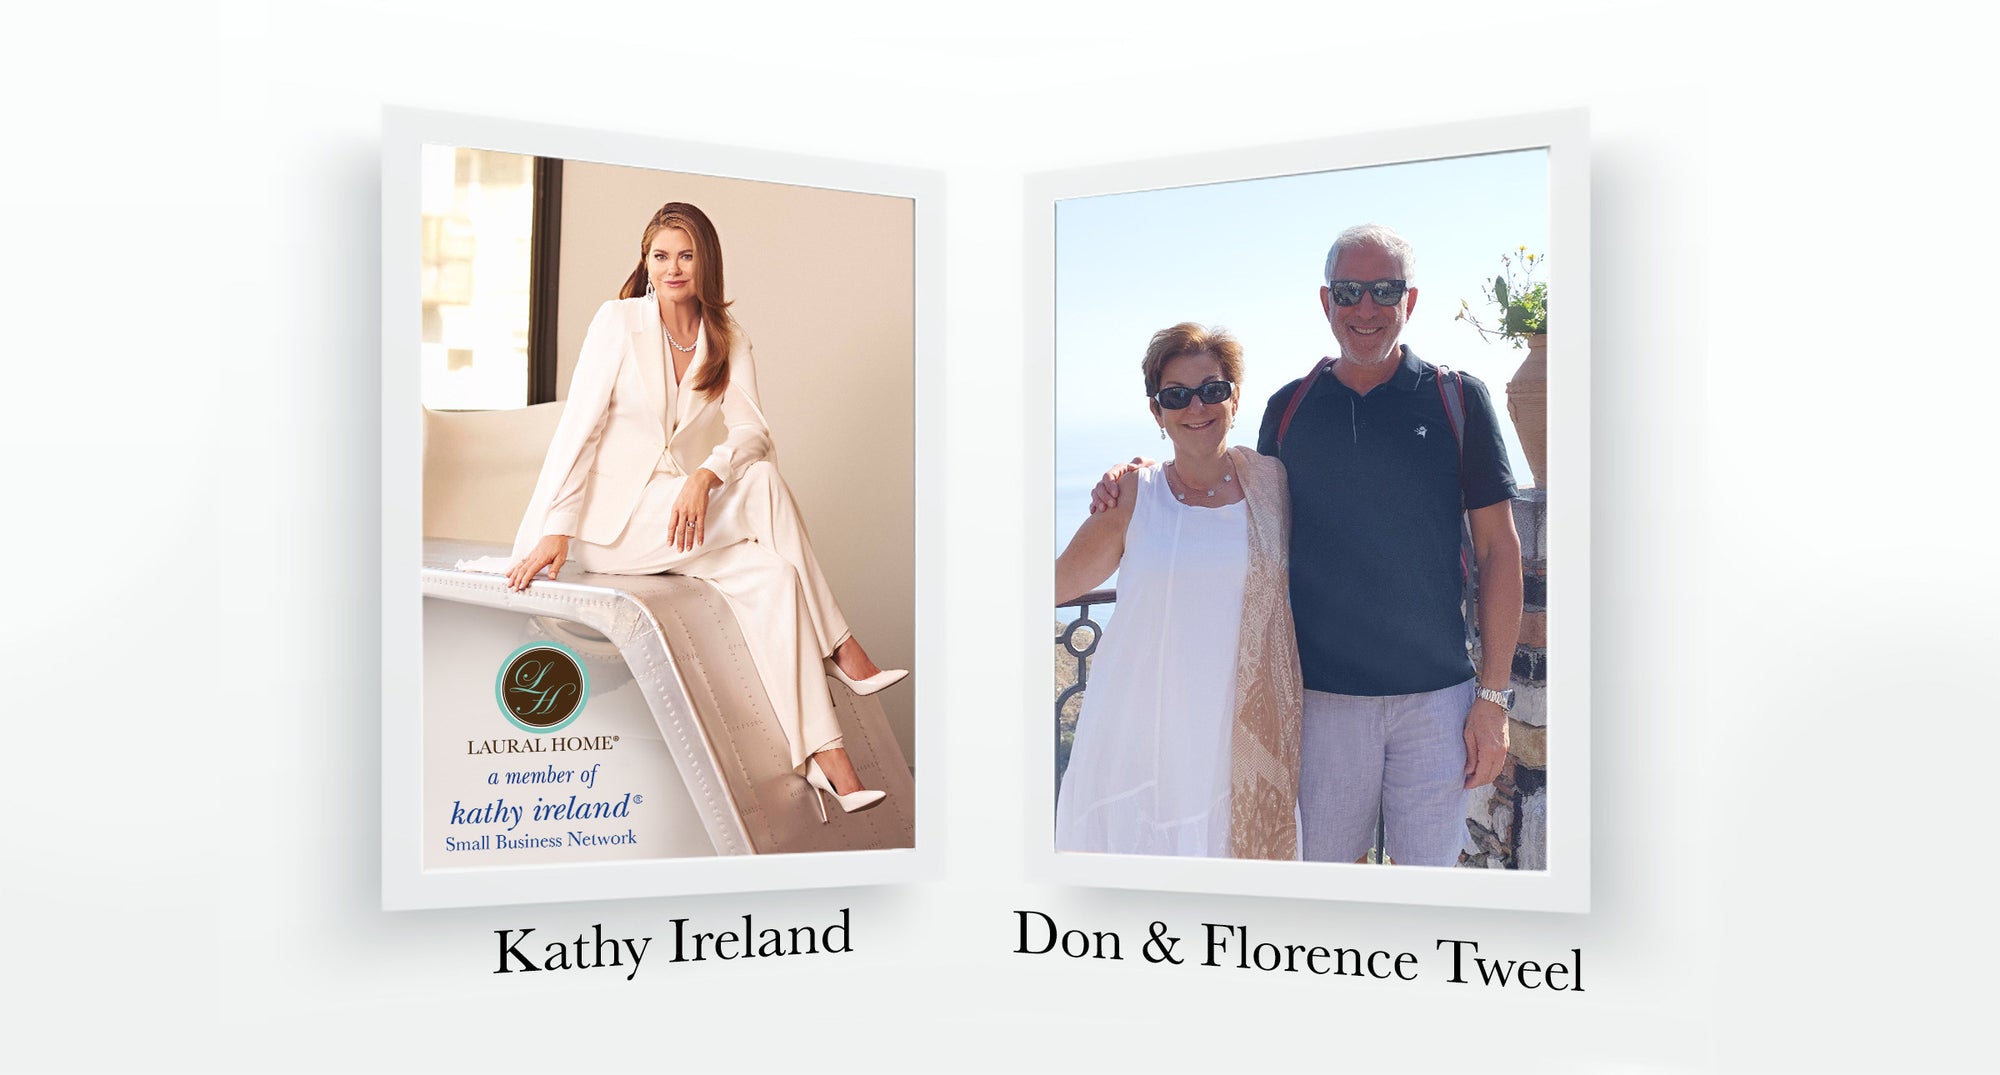 kathy ireland Small Business Network Welcomes Us to its Brand Portfolio!